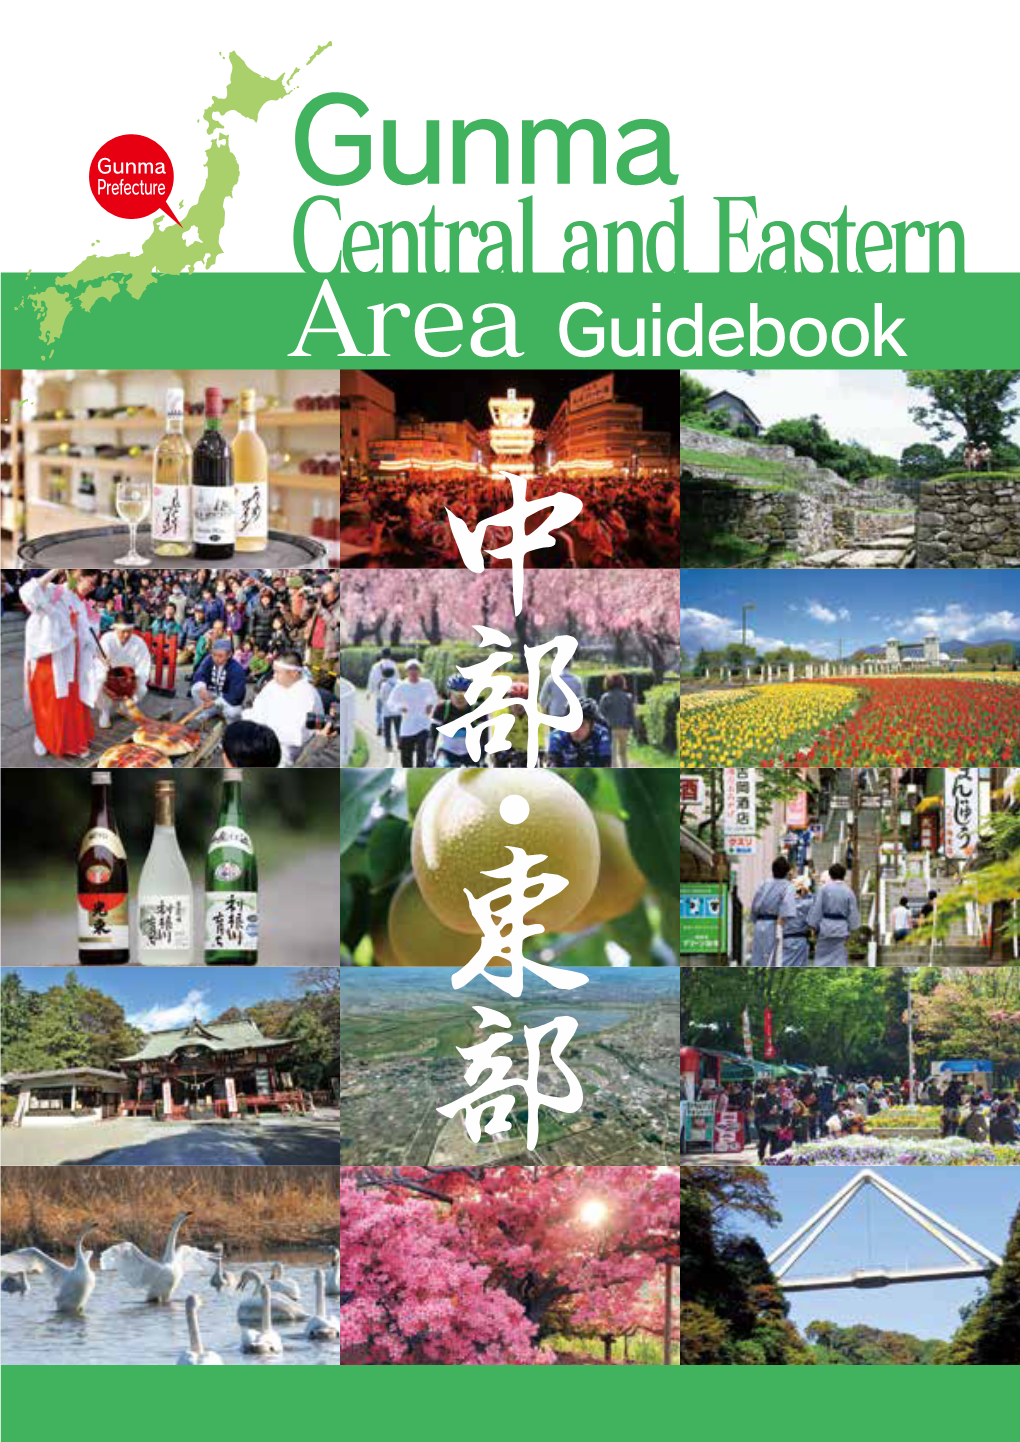 Central and Eastern Area Guidebook 120 沼田 IC 間藤 17 a B 沼田 C D E F G H